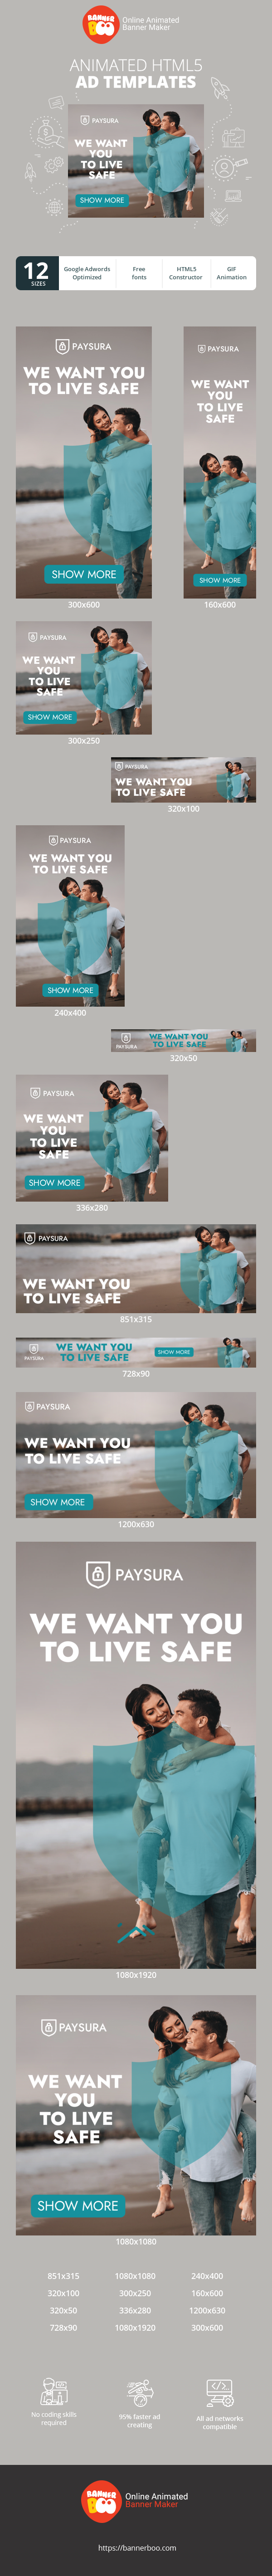 Banner ad template — We Want You To Live Safe — Insurance